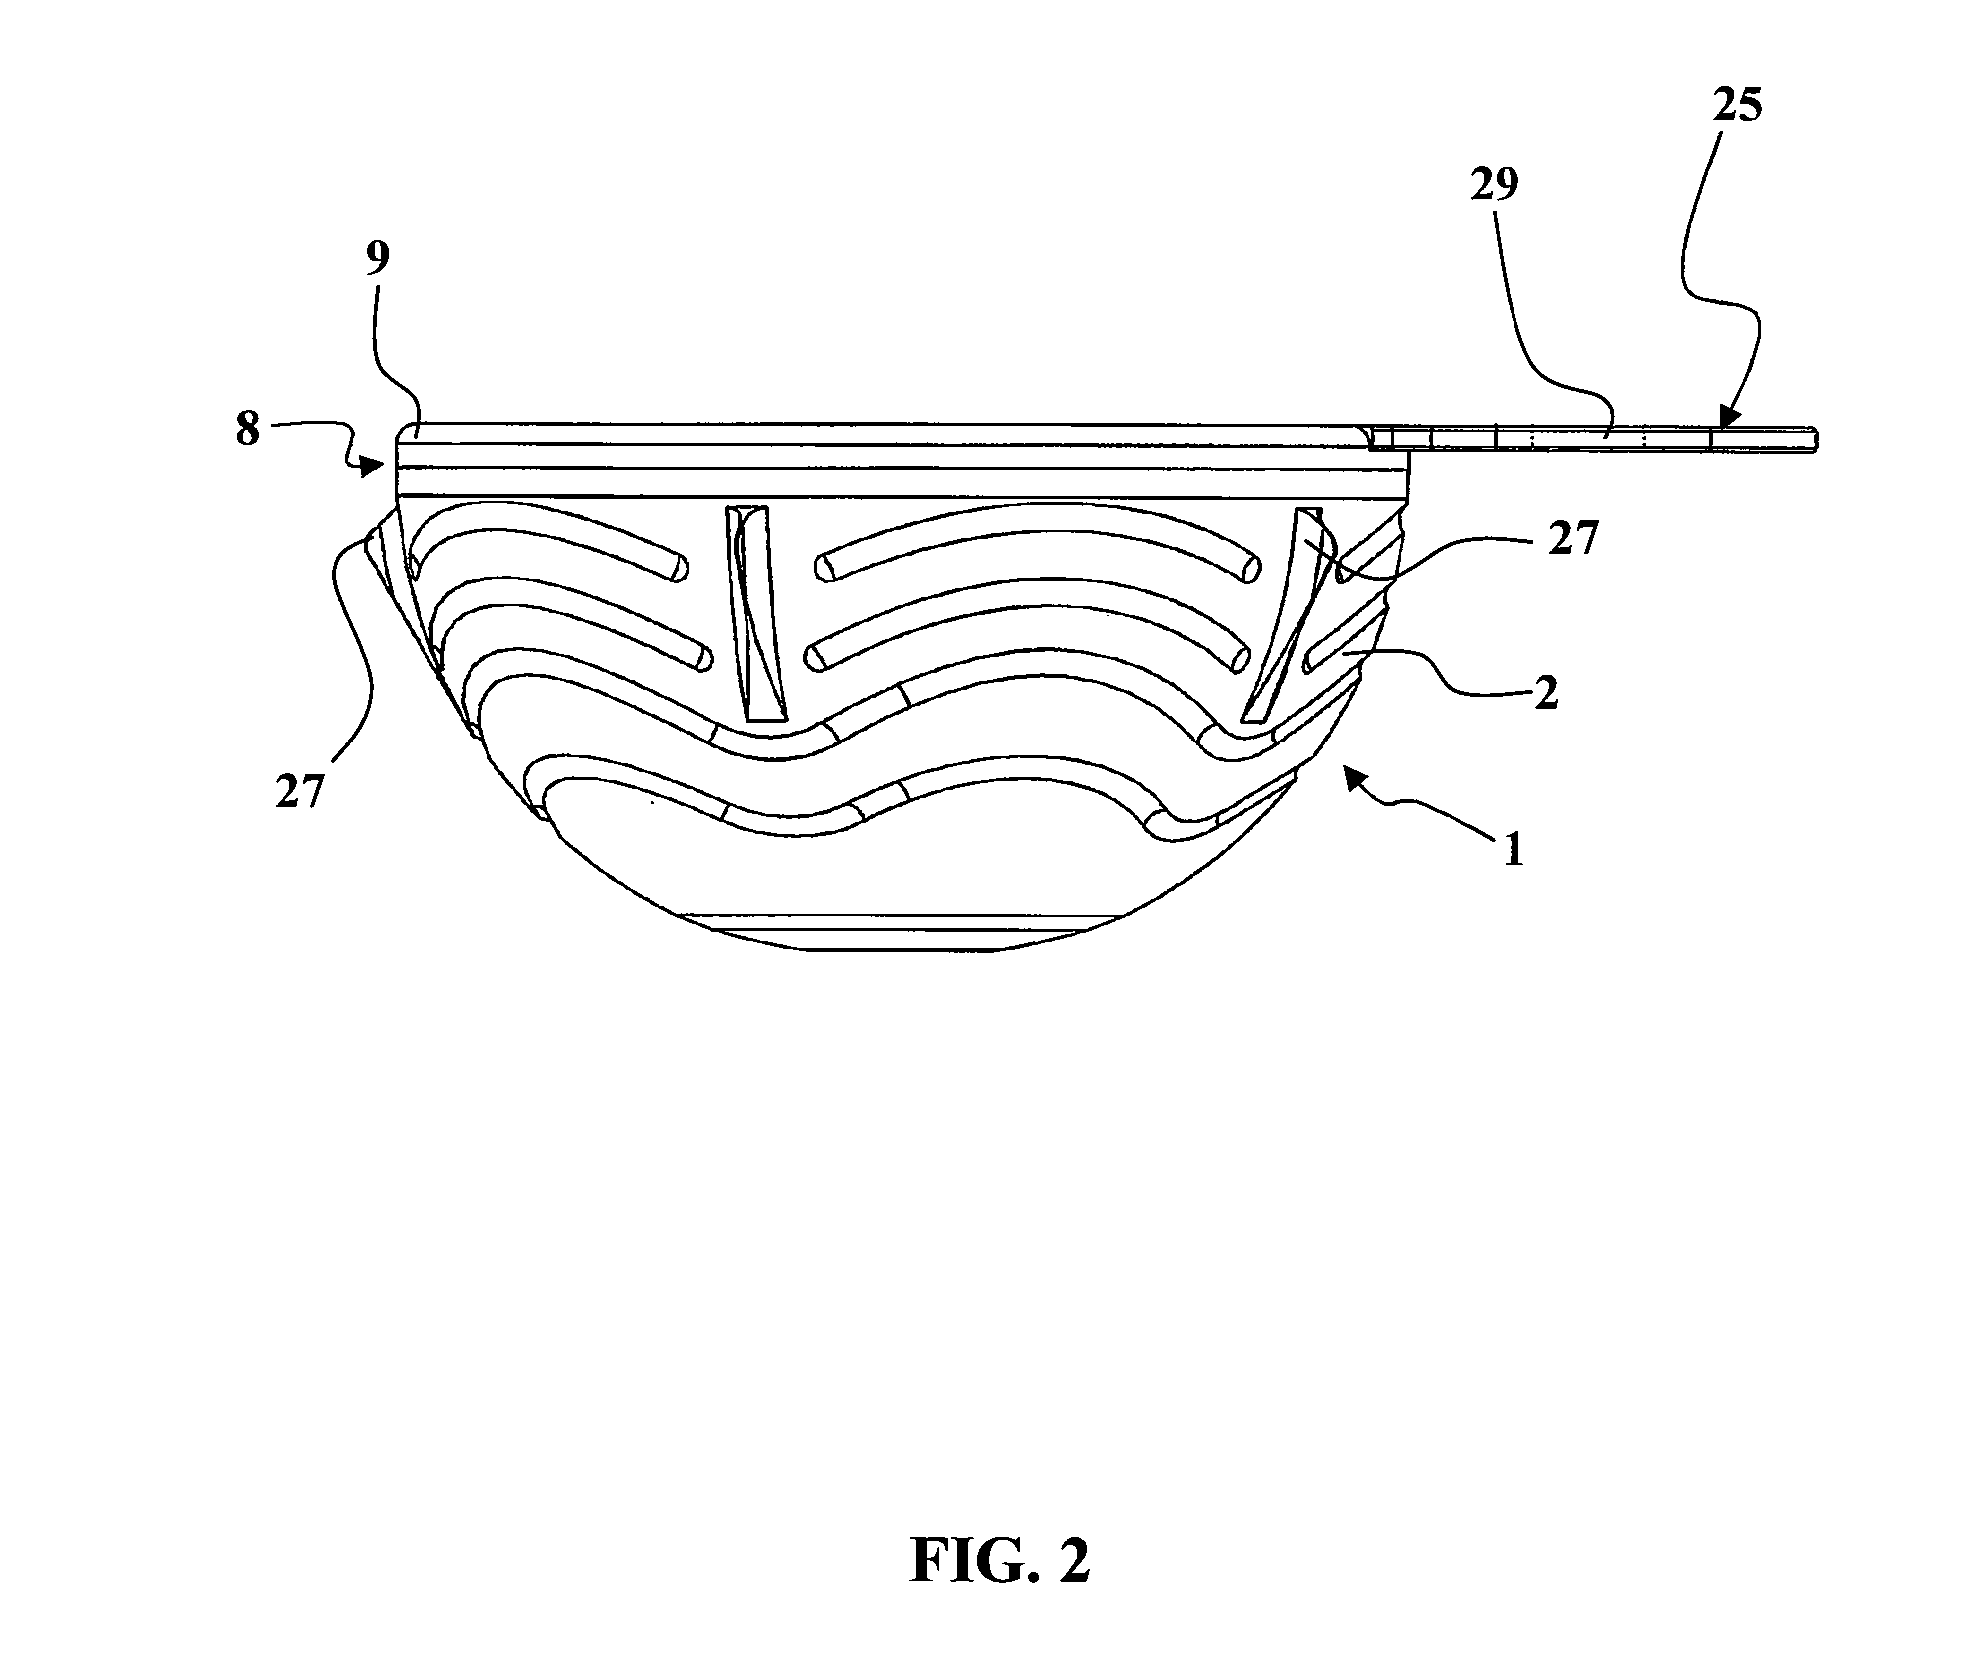 Cotyle comprising a sterile interface